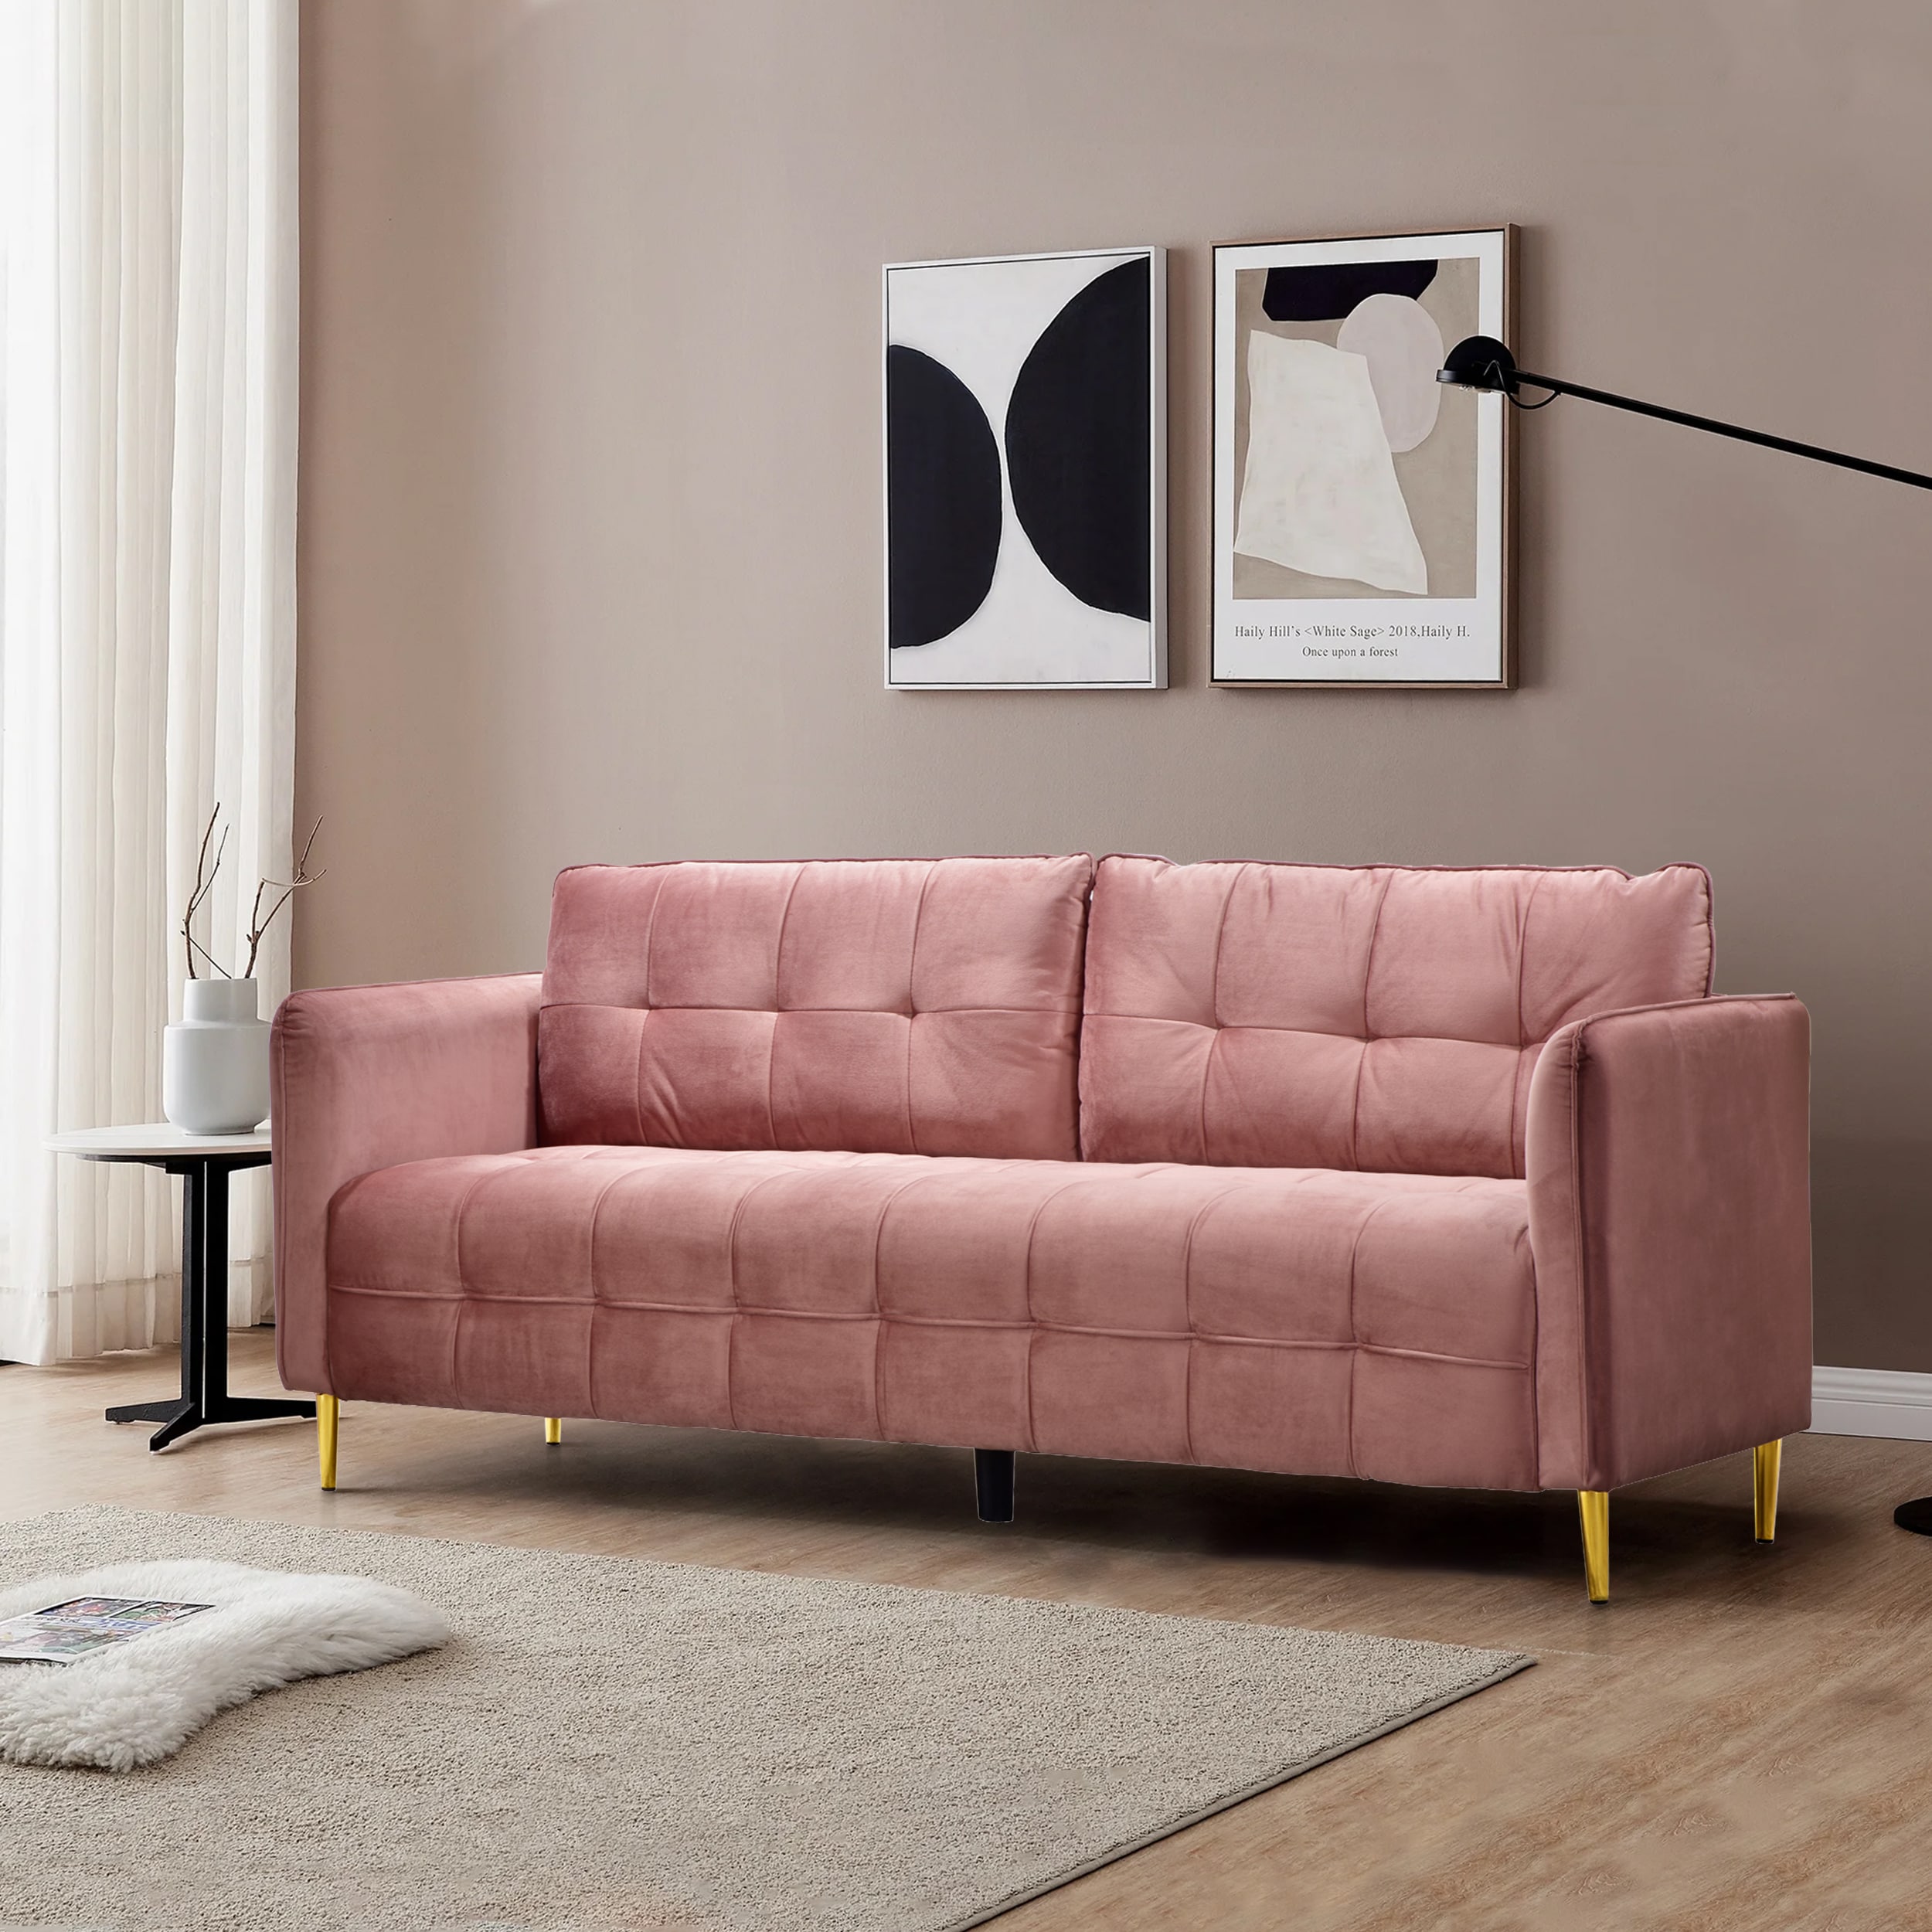 CASAINC Futon couch sofa 76-in Modern Pink Cotton Sofa at Lowes.com